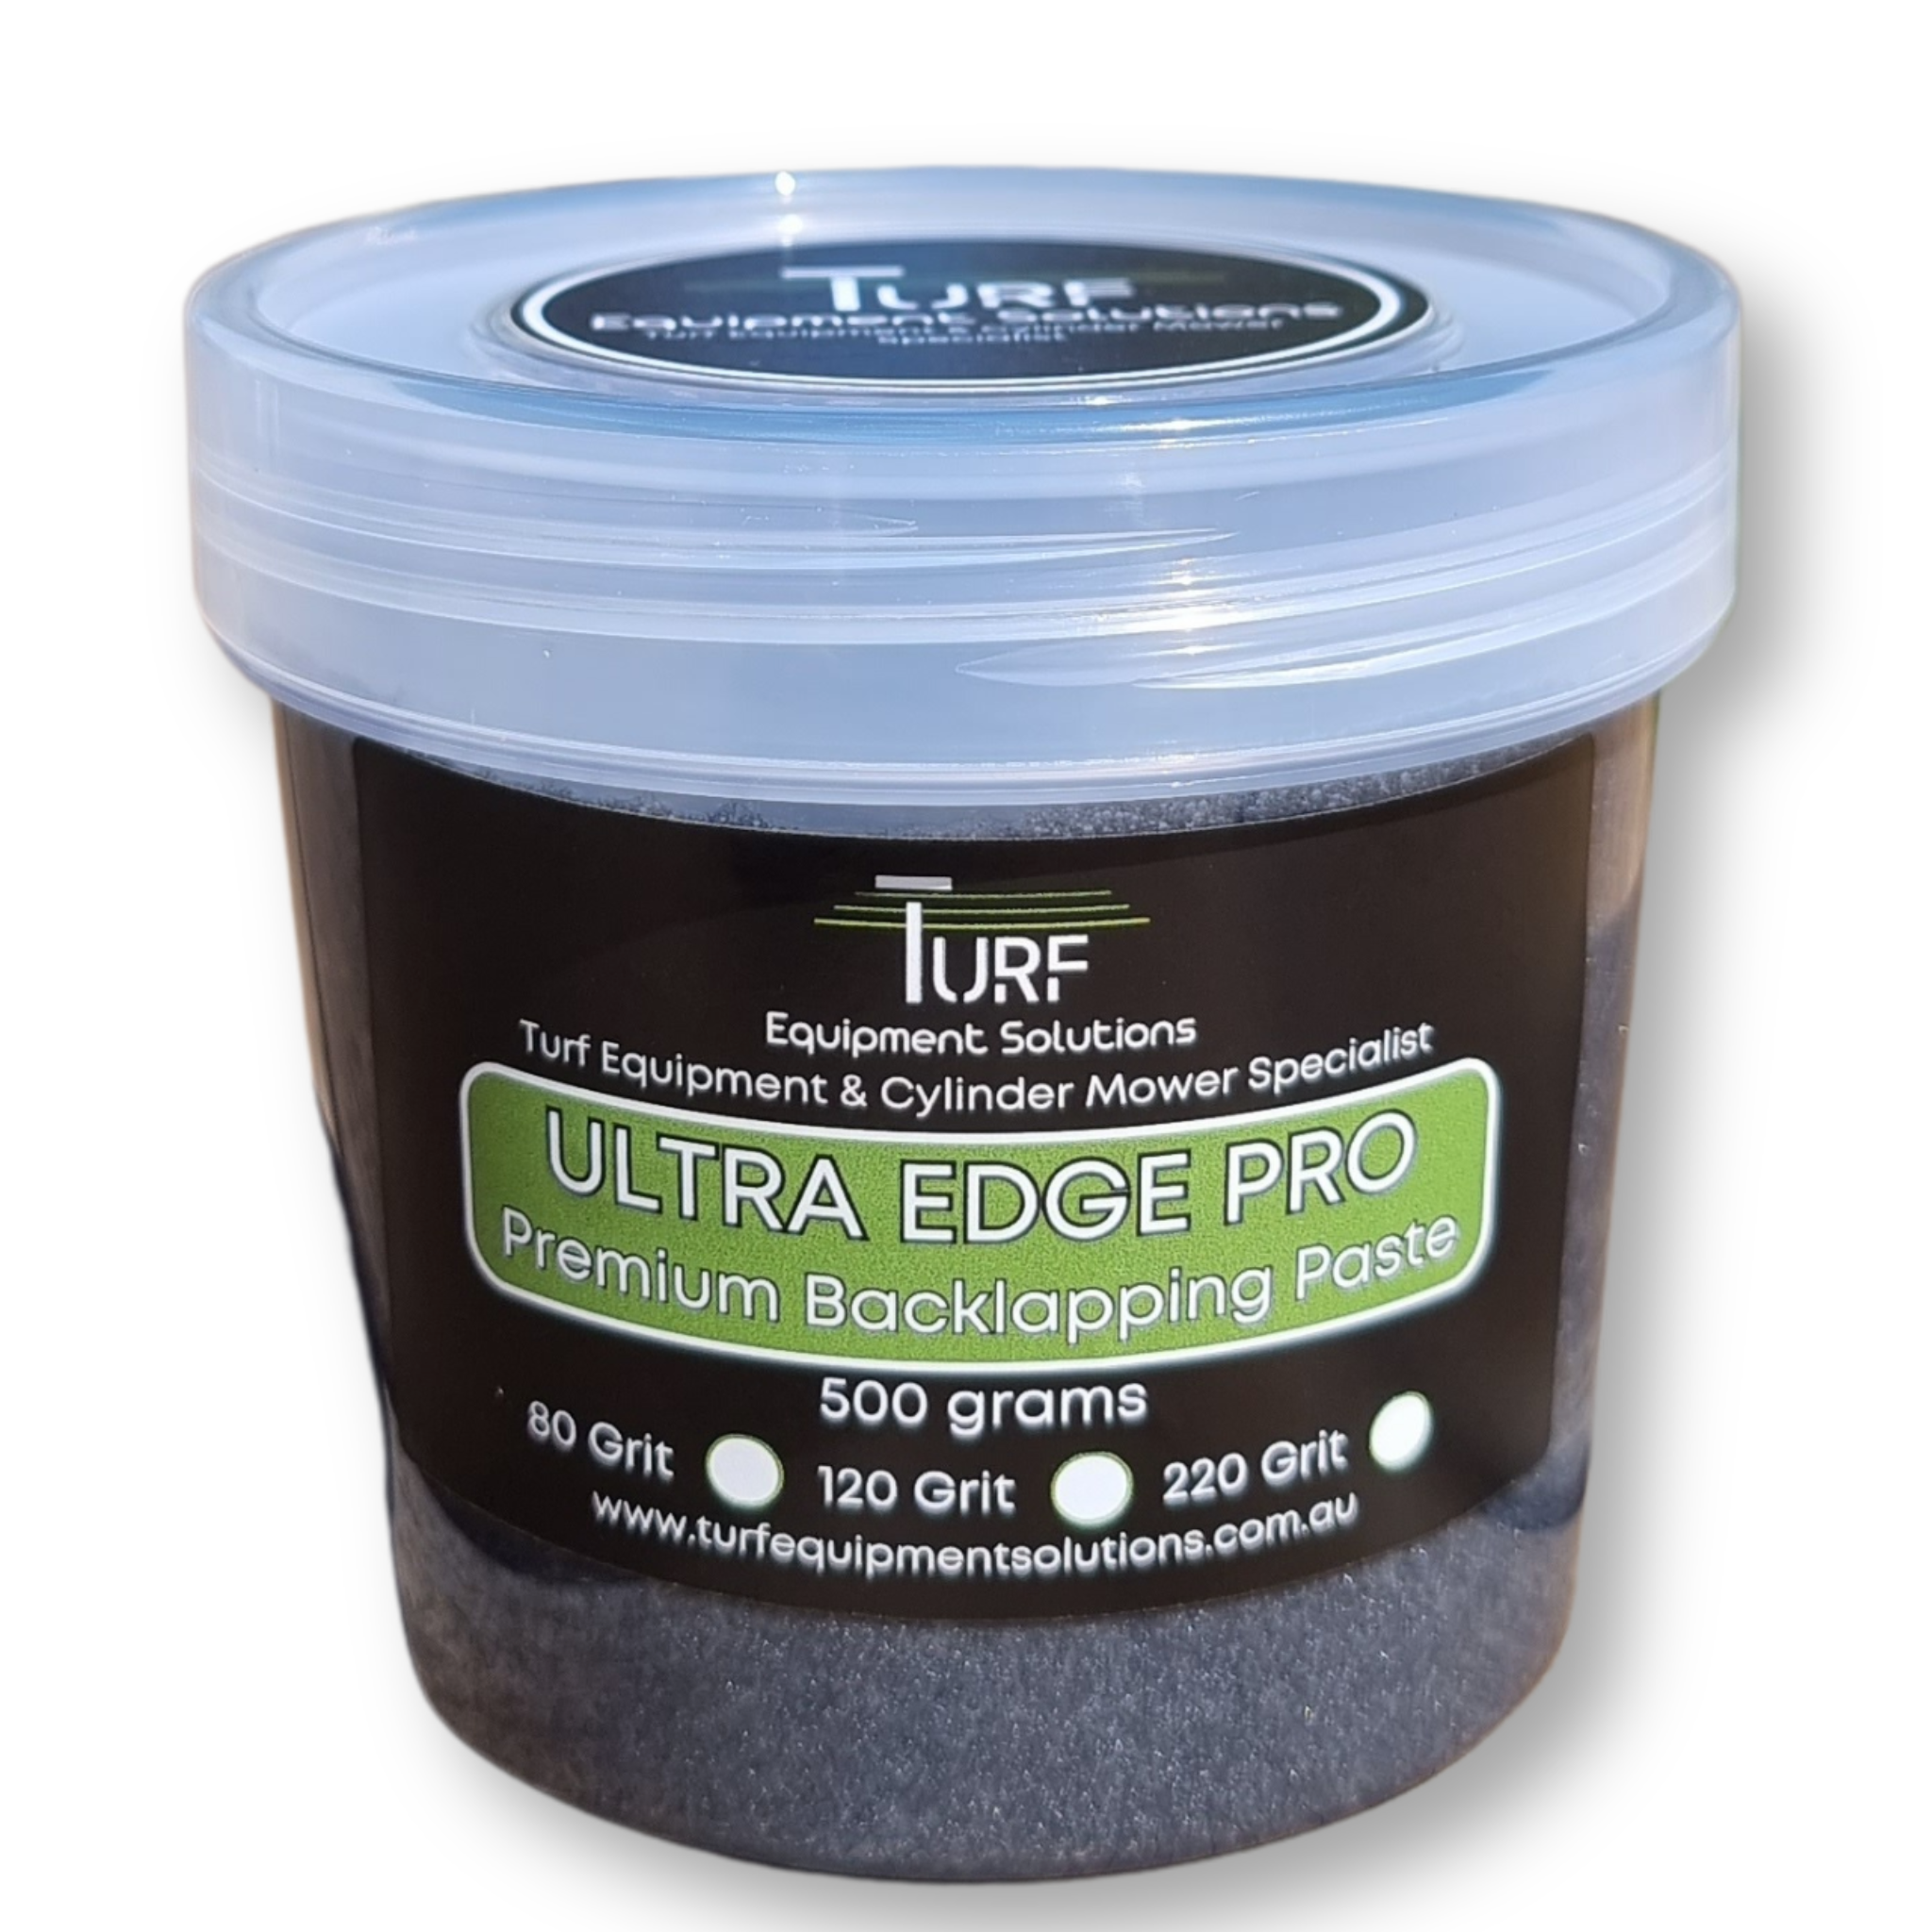 Ultra Edge PRO Backlapping Paste